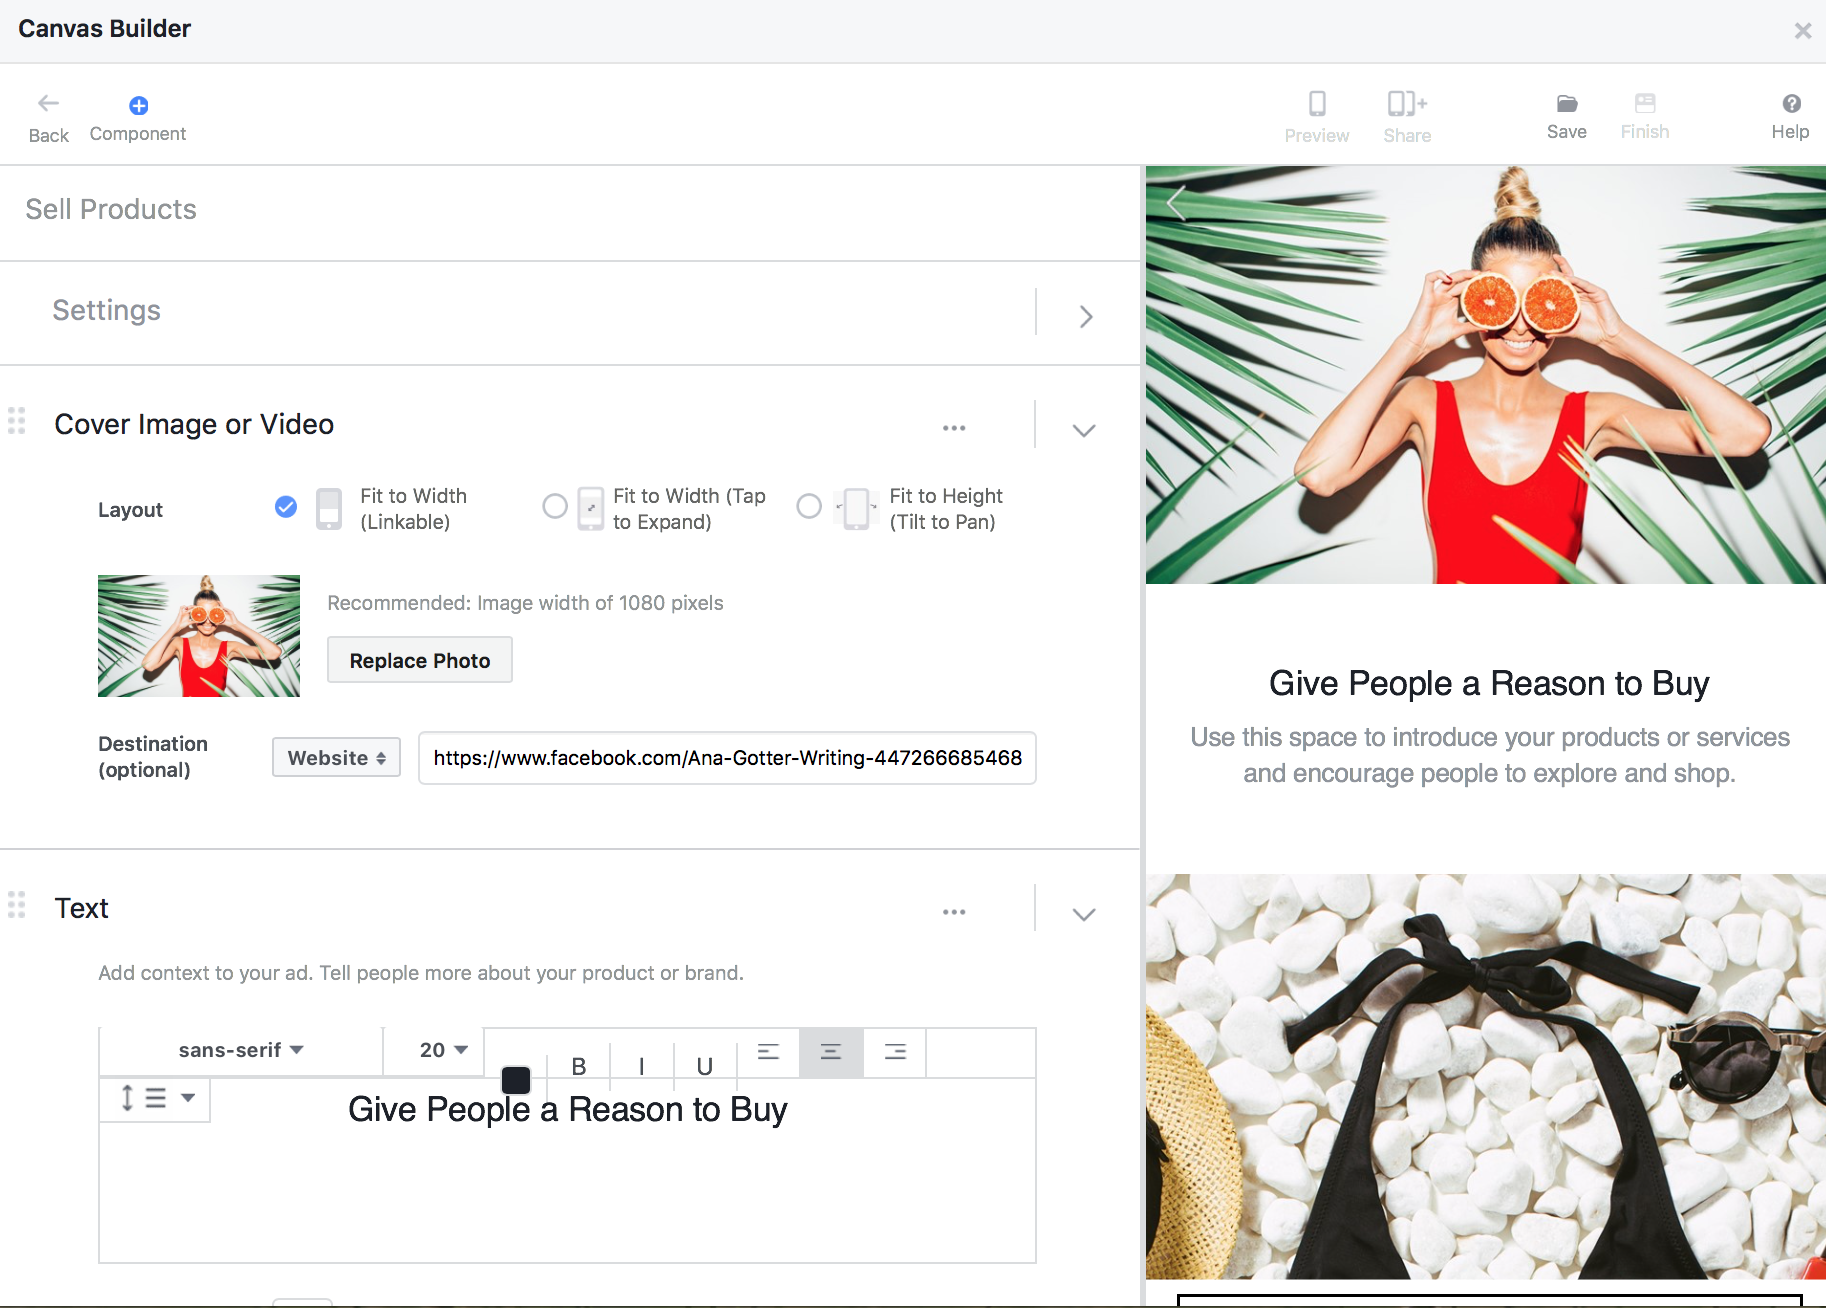 How to Create a Fullscreen Canvas Experience on Facebook